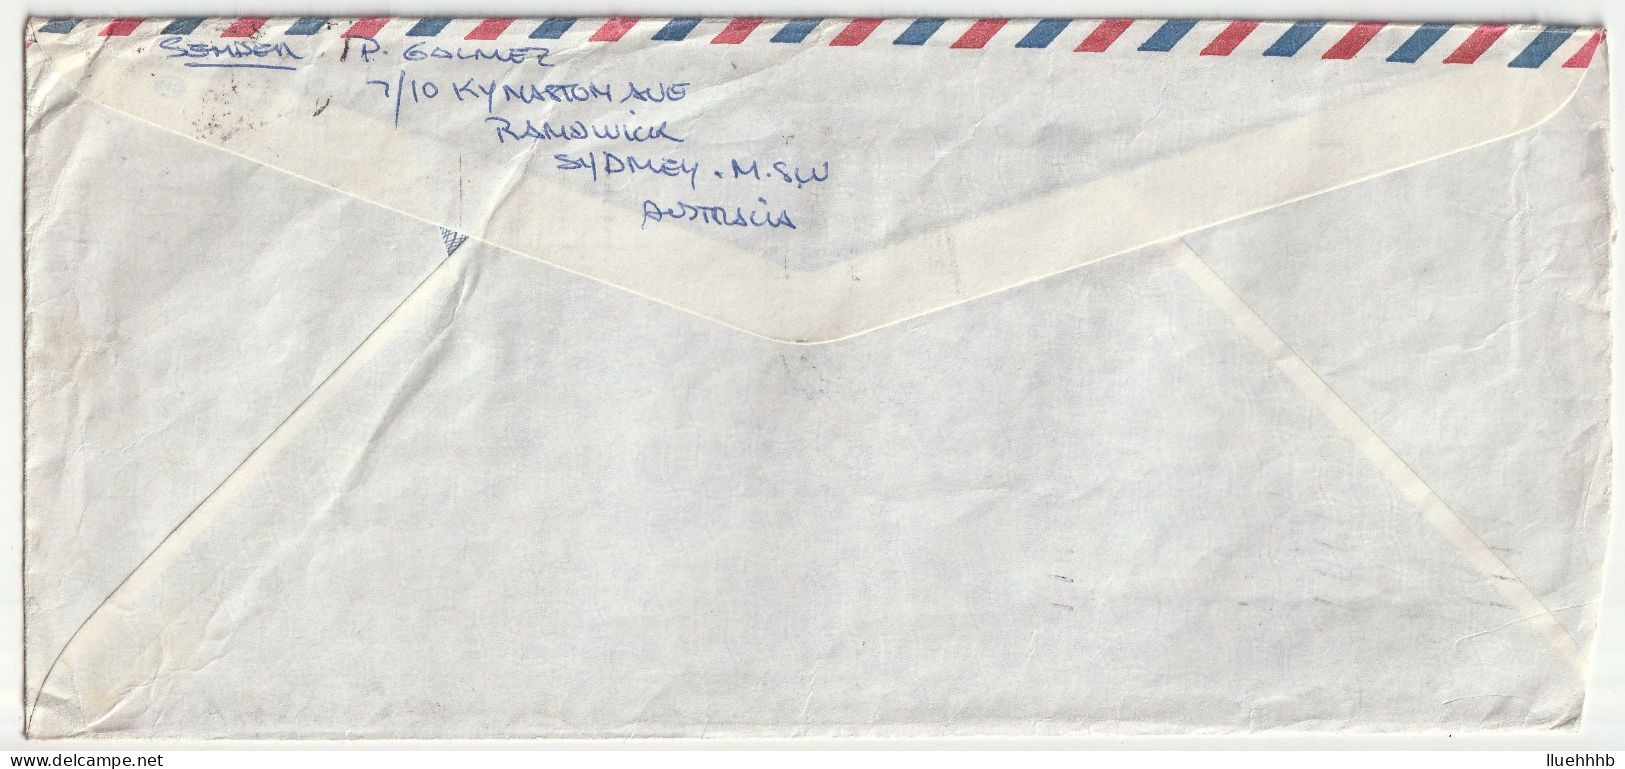 AUSTRALIA: 45c Cricket Centenary Solo Usage On 1977 Airmail Cover To CHILE - Covers & Documents